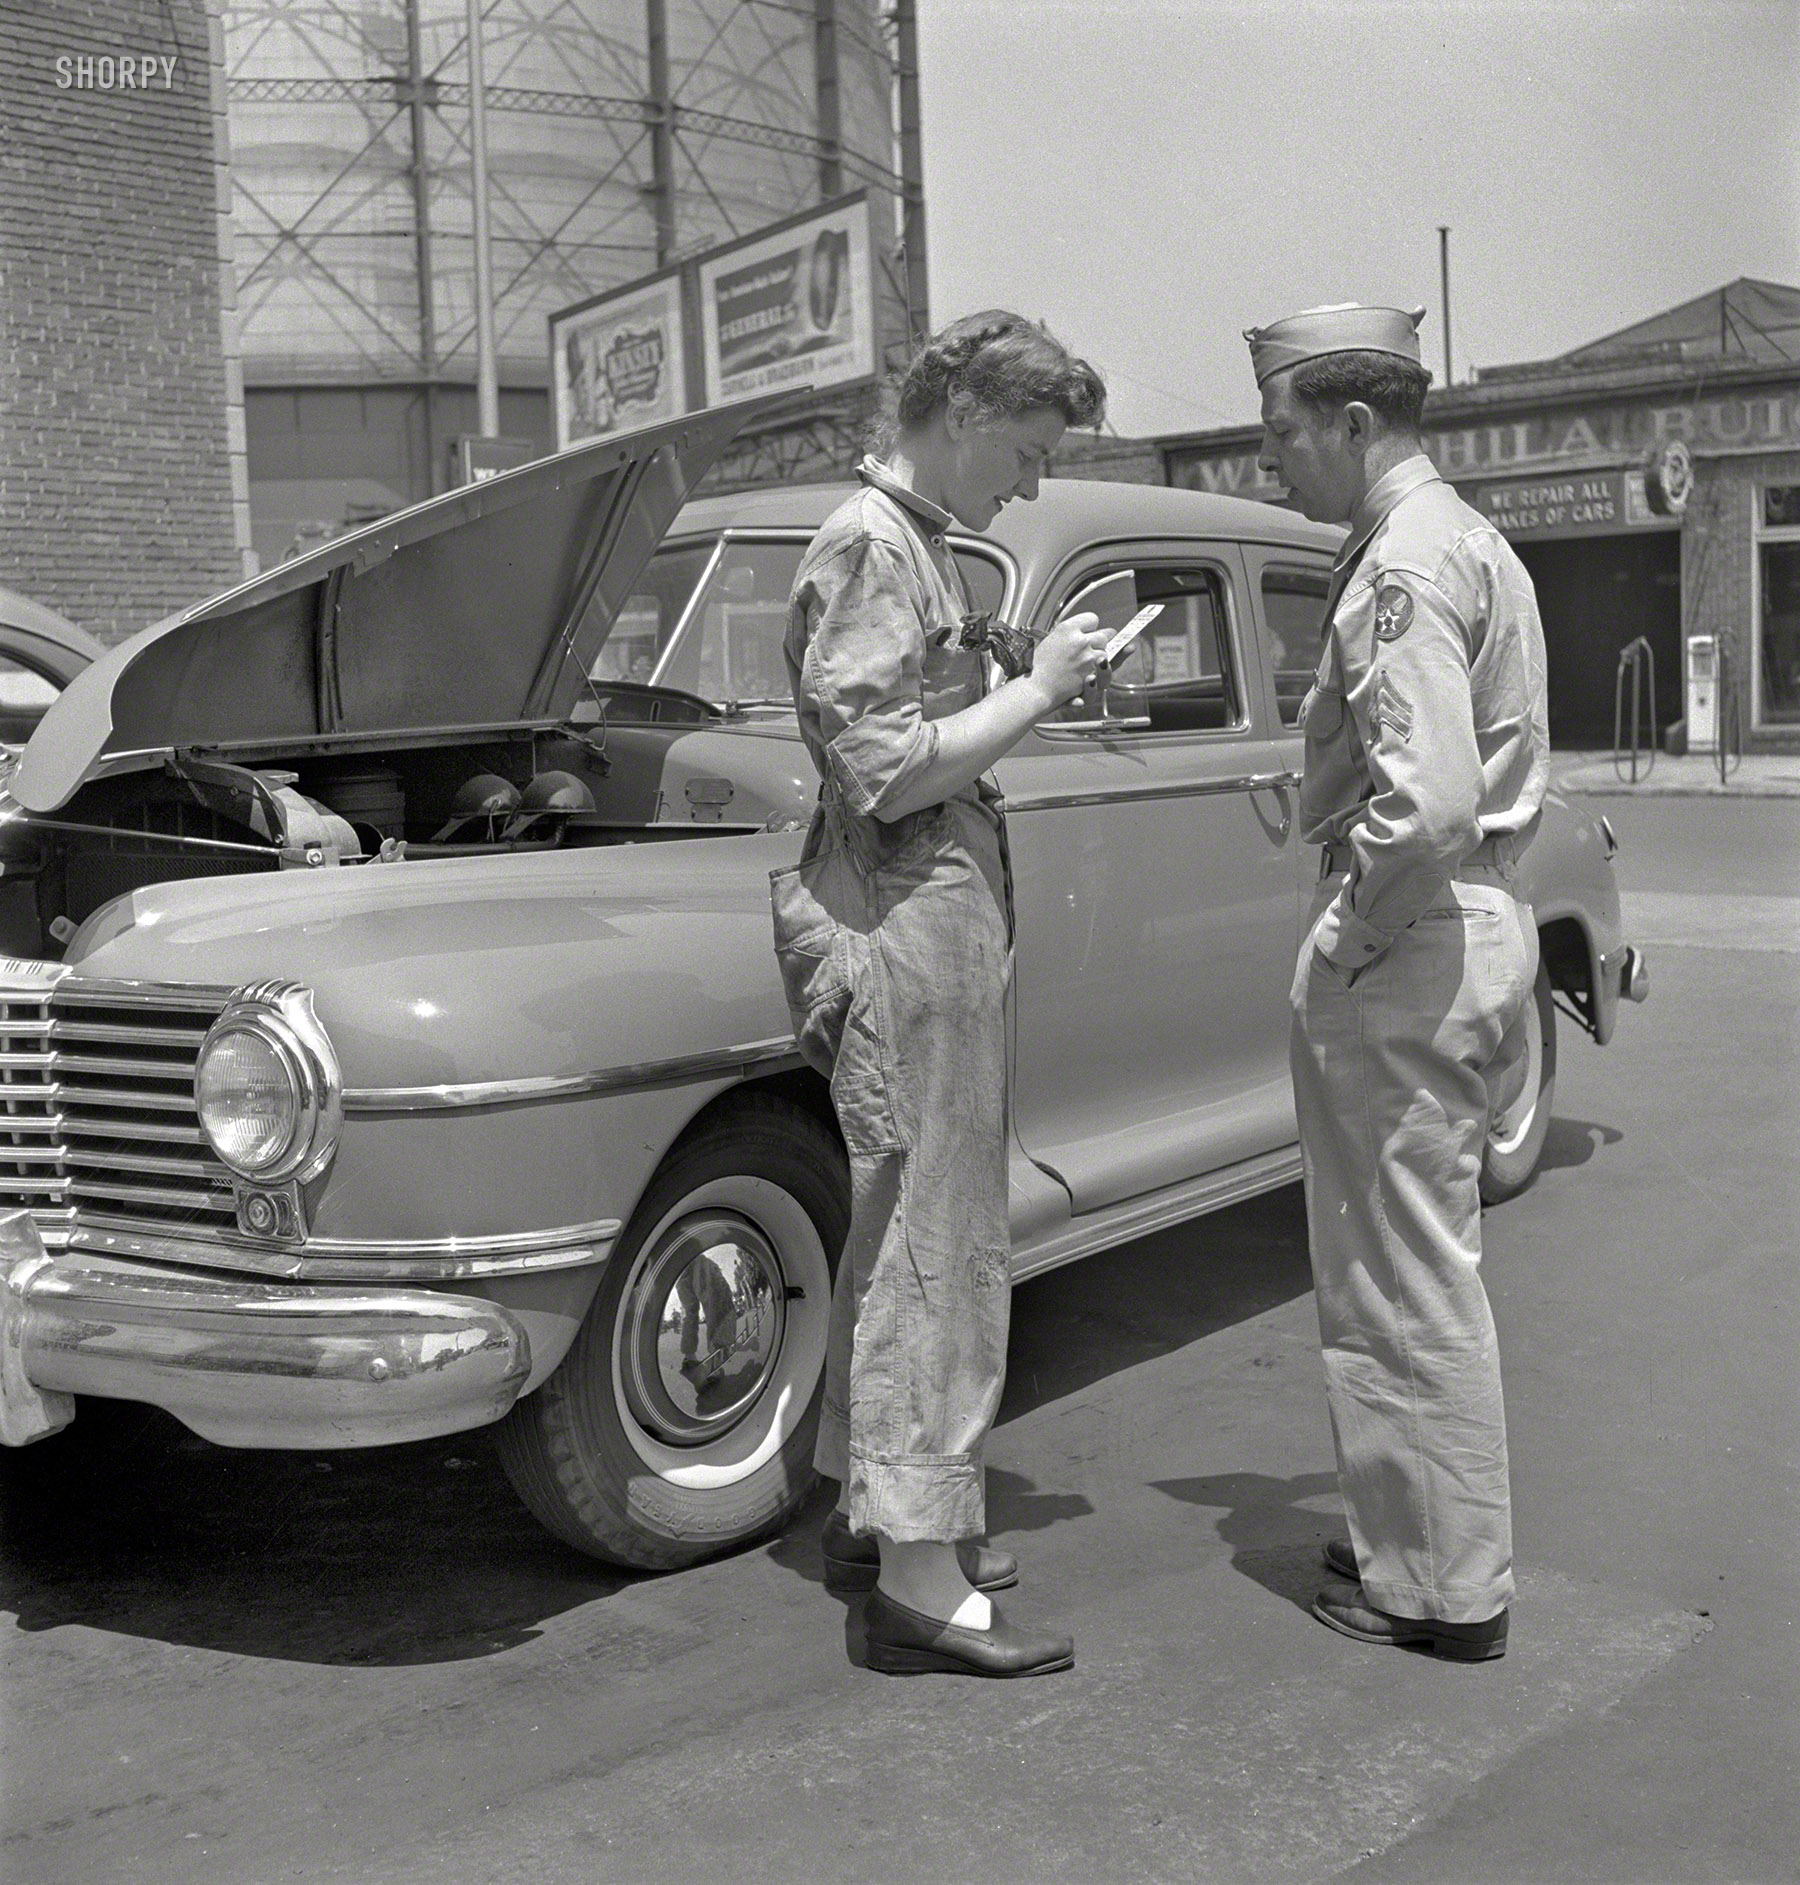 June 1943. "Philadelphia, Pennsylvania. Miss Frances Heisler (last seen here), attendant at one of the Atlantic Refining Company garages. She was formerly a clerk in the payroll department of the Curtis Publishing Company." Photo by Jack Delano for the Office of War Information. View full size.